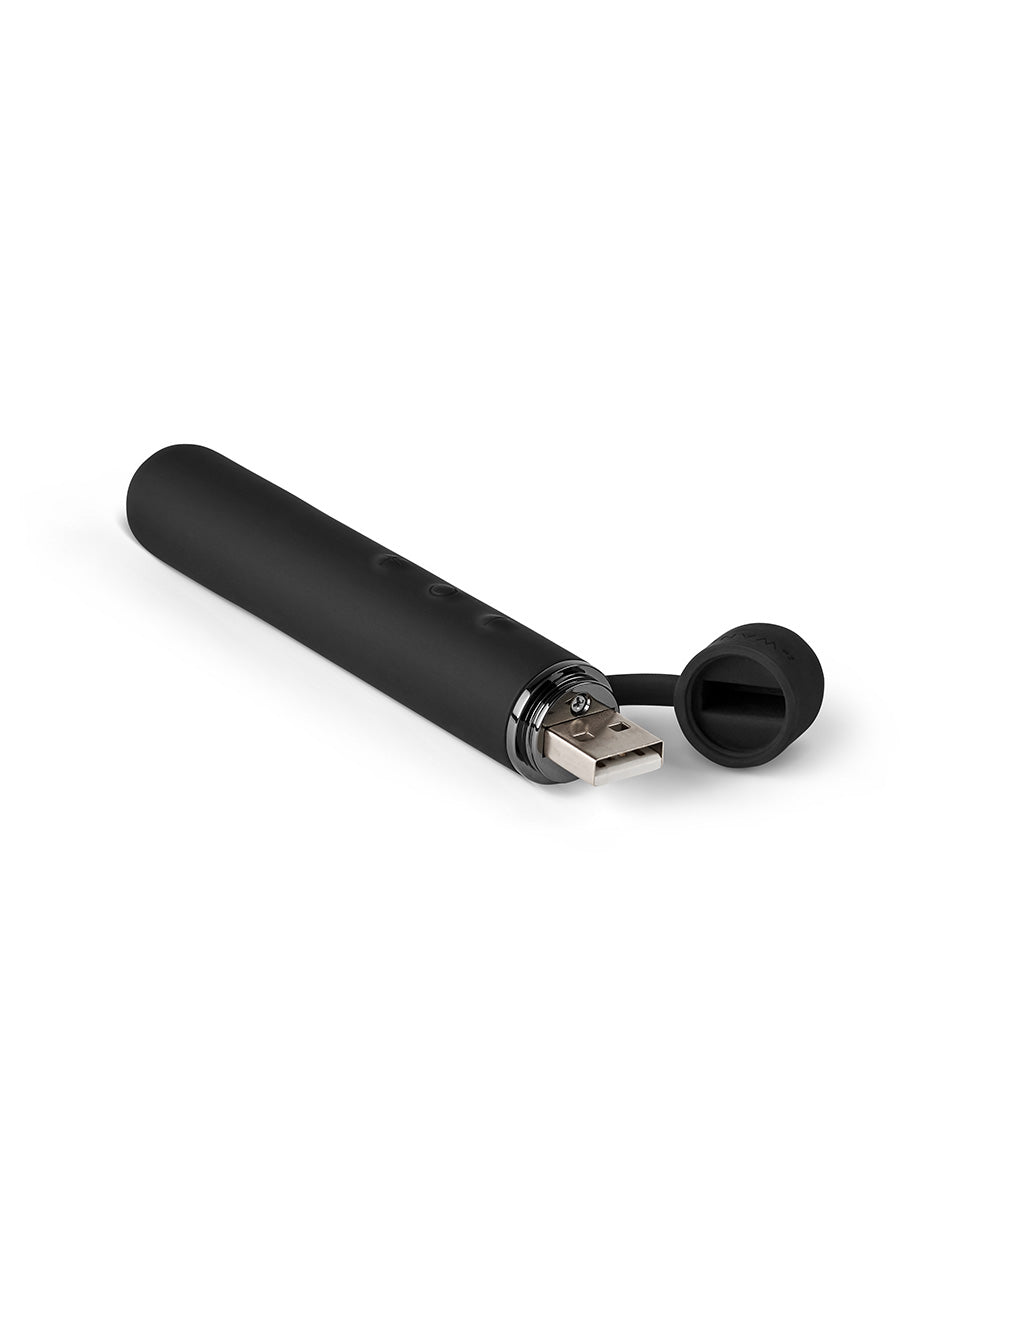 Le Wand Baton Rechargeable Clitoral Vibrator- Black- Chager